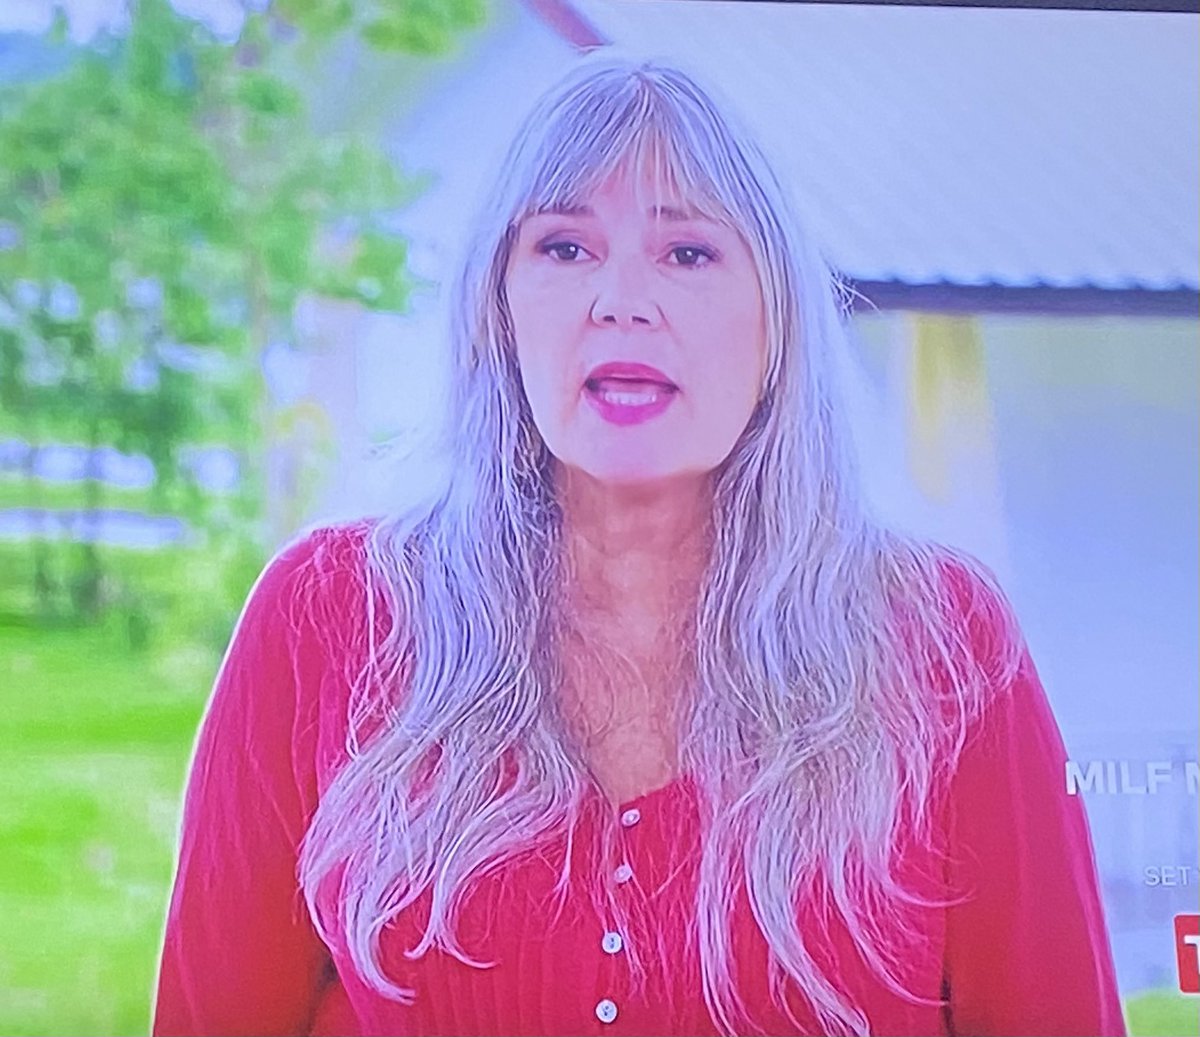 #90dayfiancehappilyeverafter #90dayfiance Emilys mom: I don’t feel comfortable with exchanging my daughter for a goat 😂 Me: Take the deal lady, ur actually winning 😆